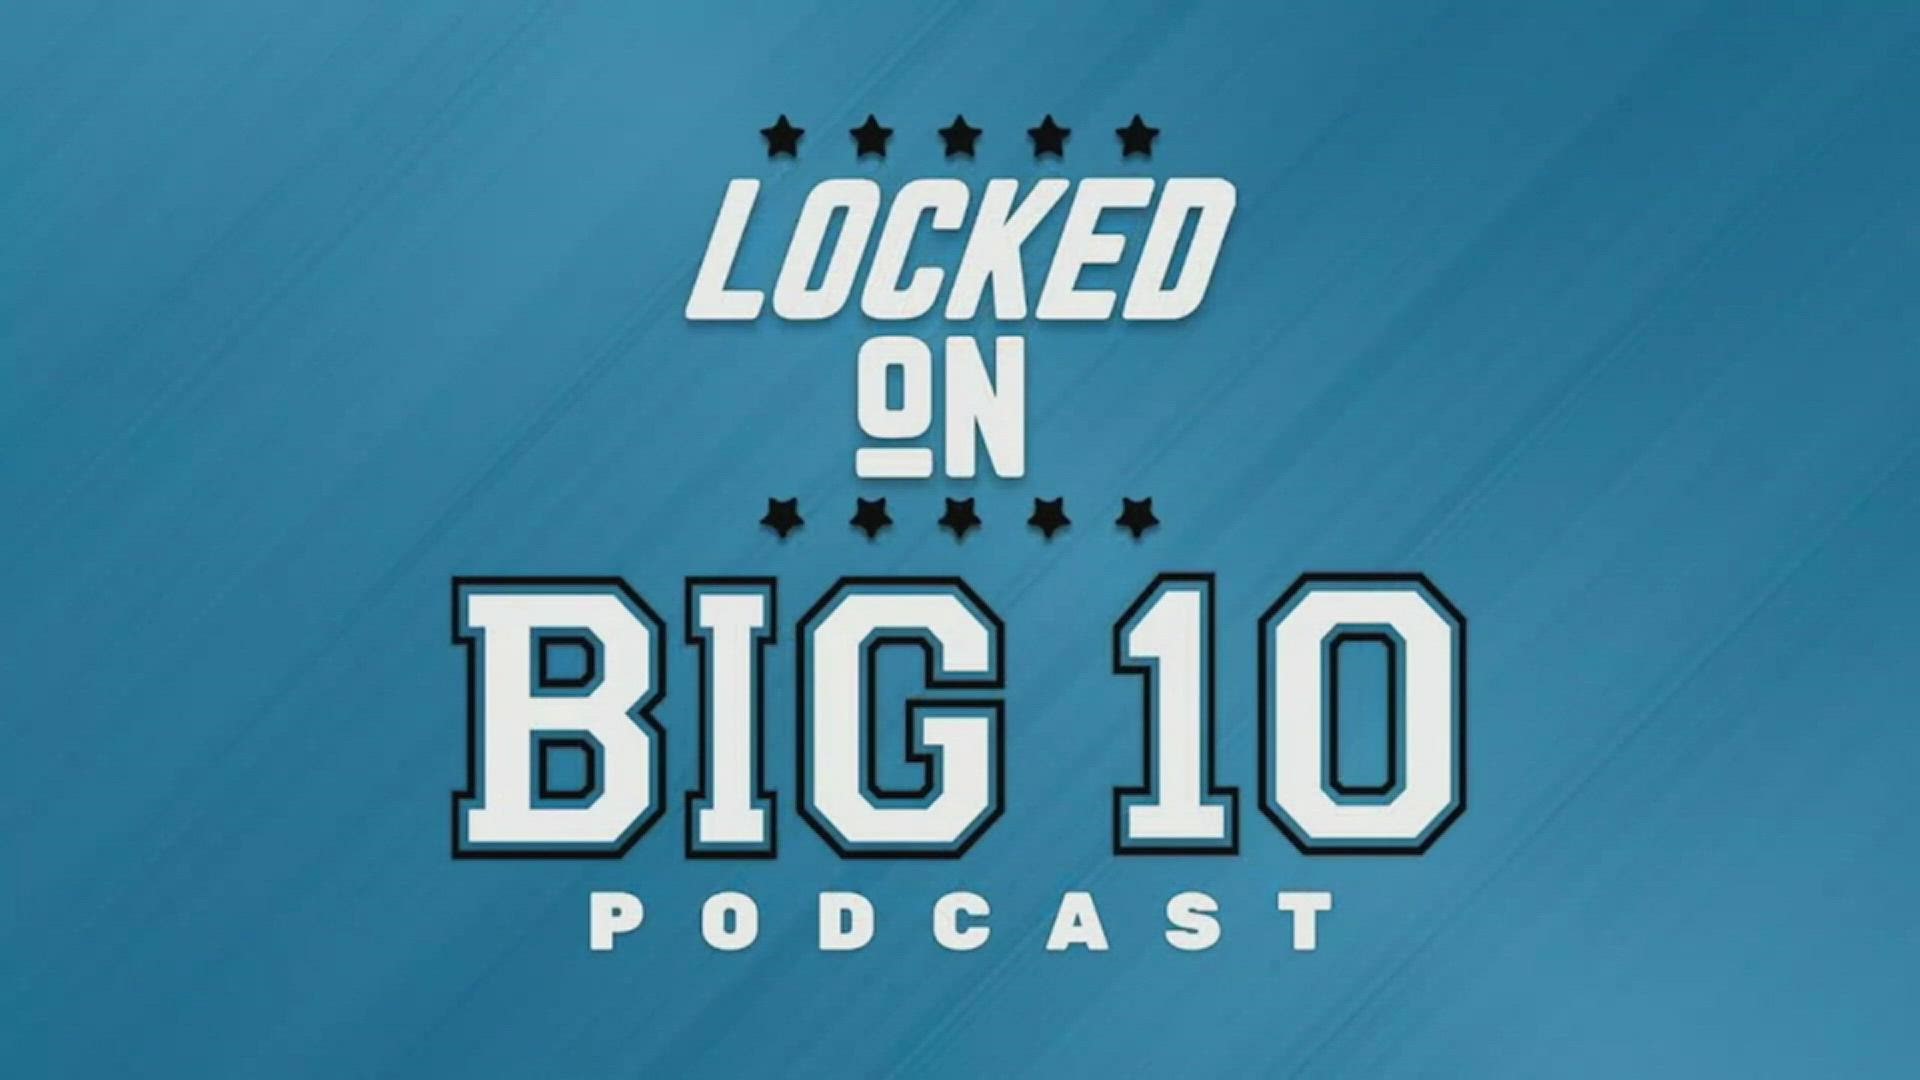 Nate Dickinson is joined by Kevin McGuire to discuss who the best quarterback in the Big Ten is at this point in the season.